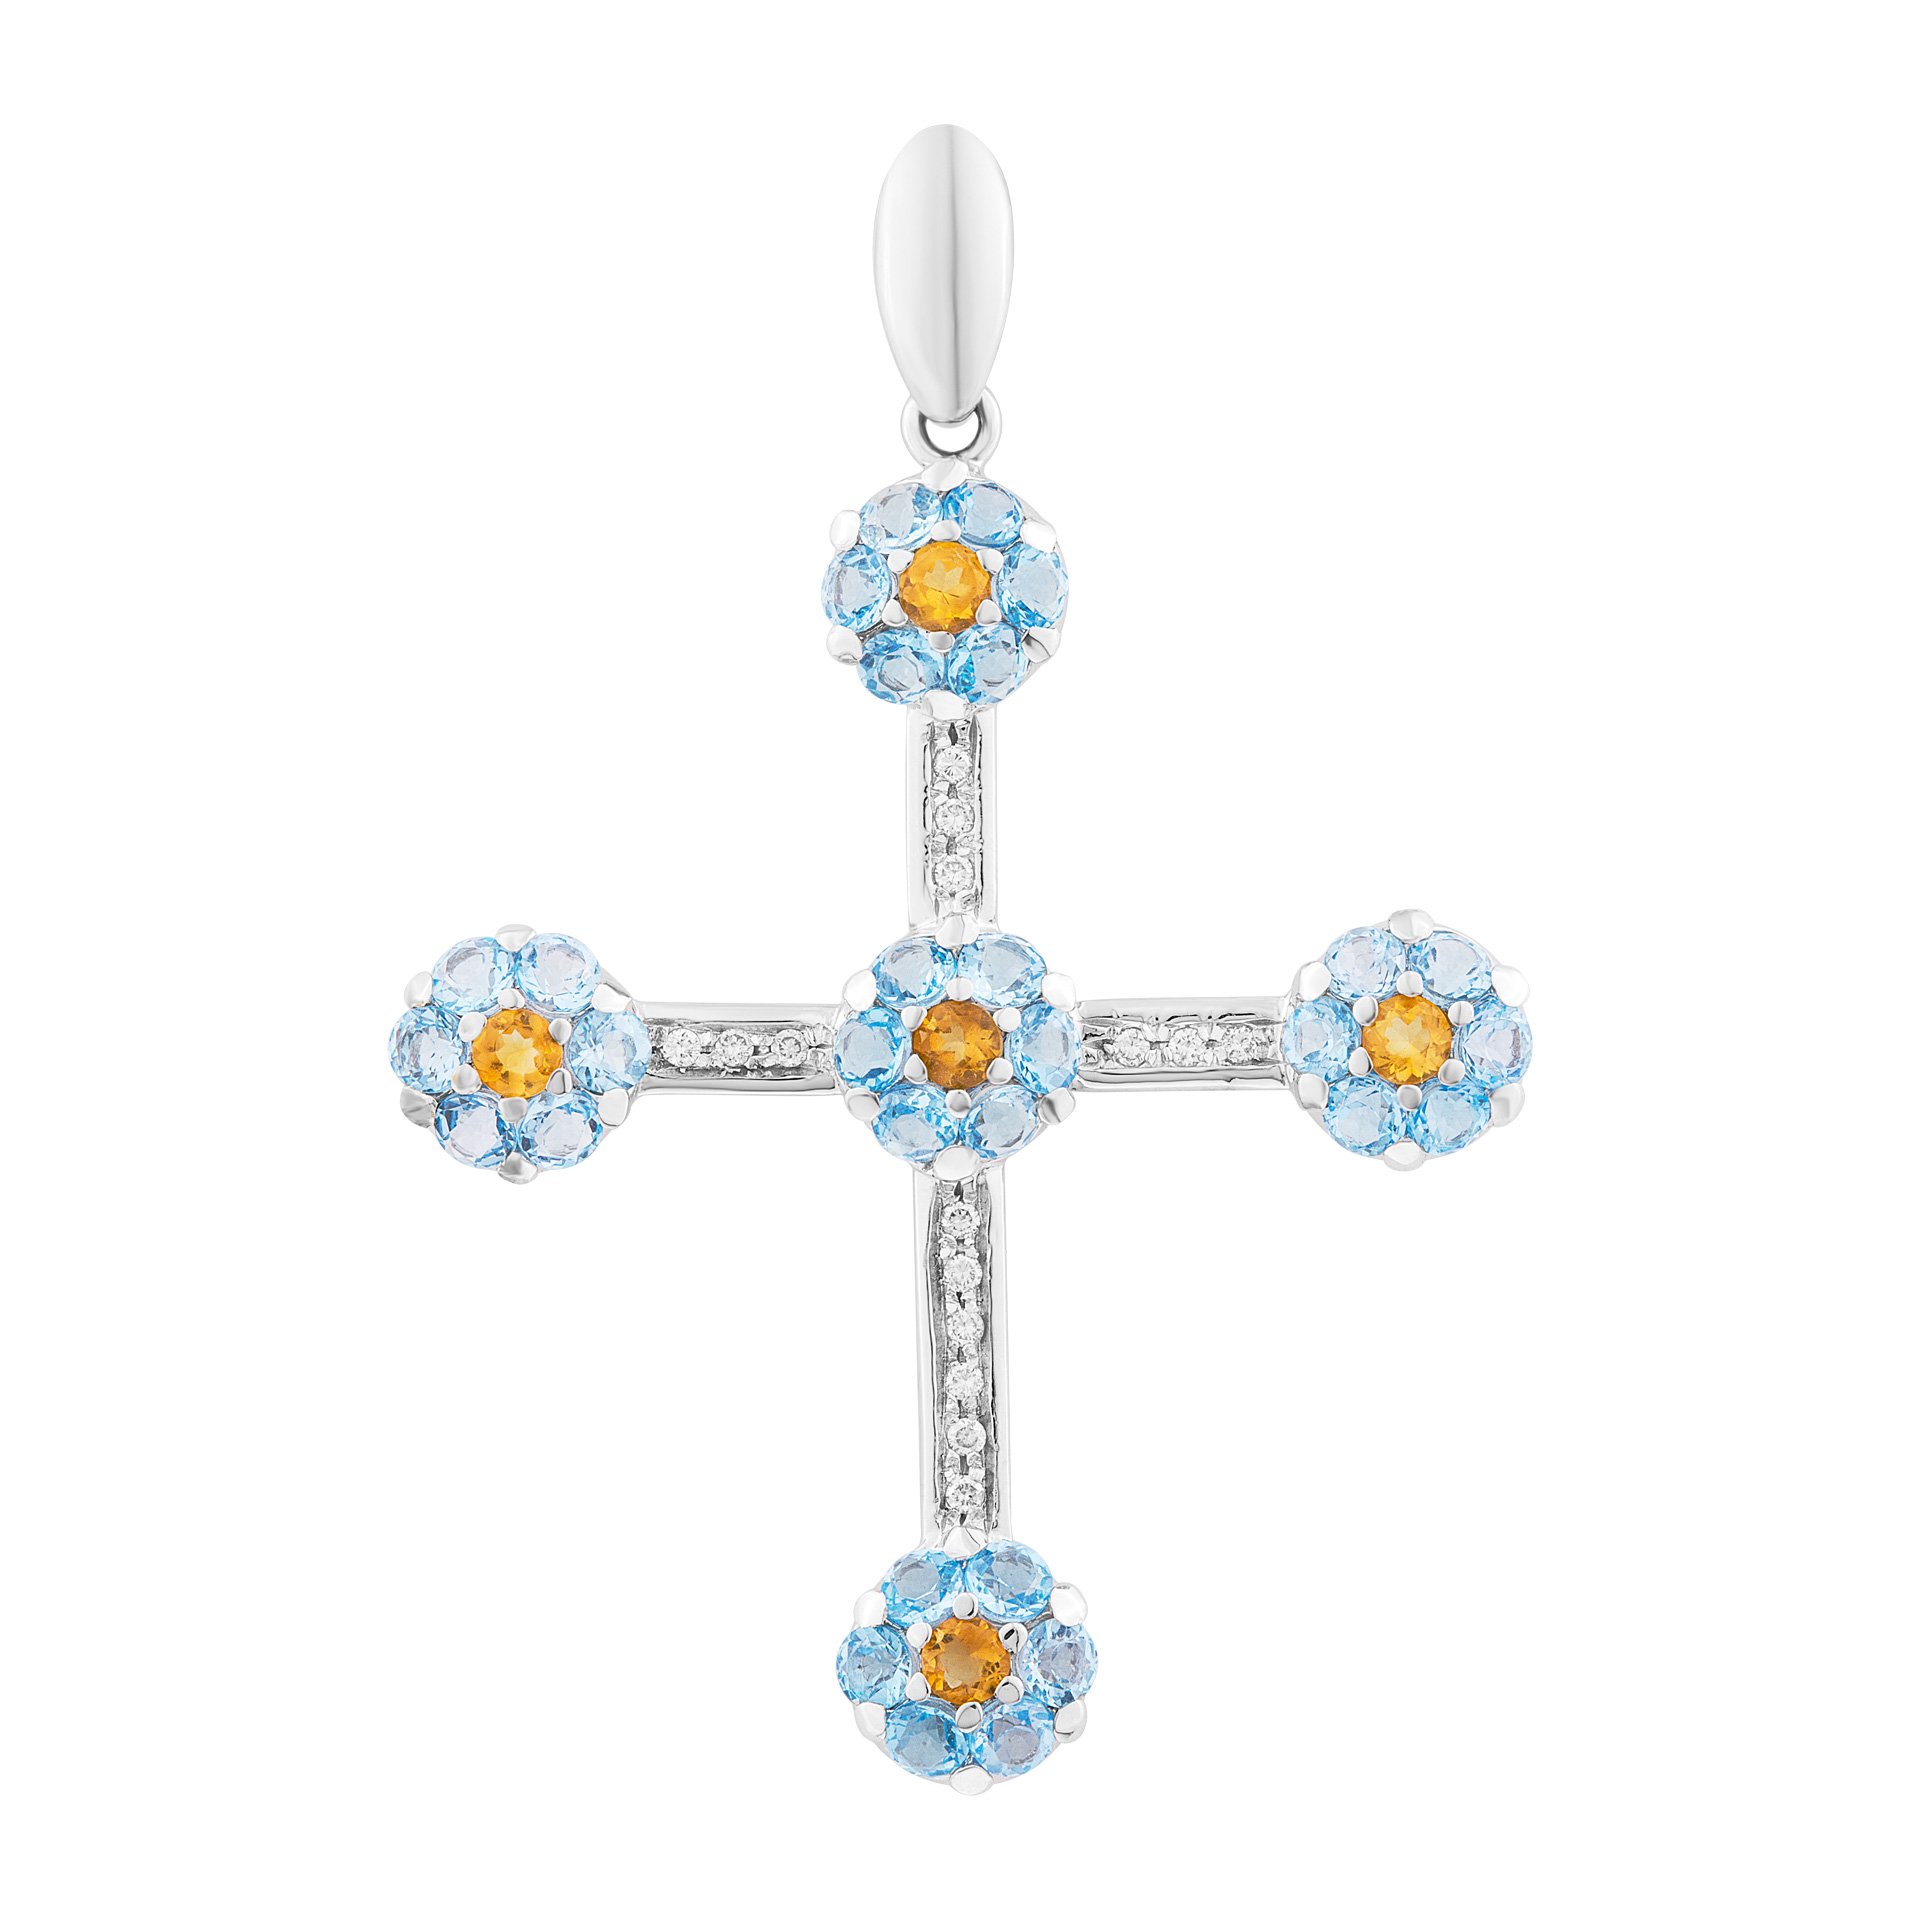 Diamond cross pendant in 18k white gold with topaz flower accents image 1